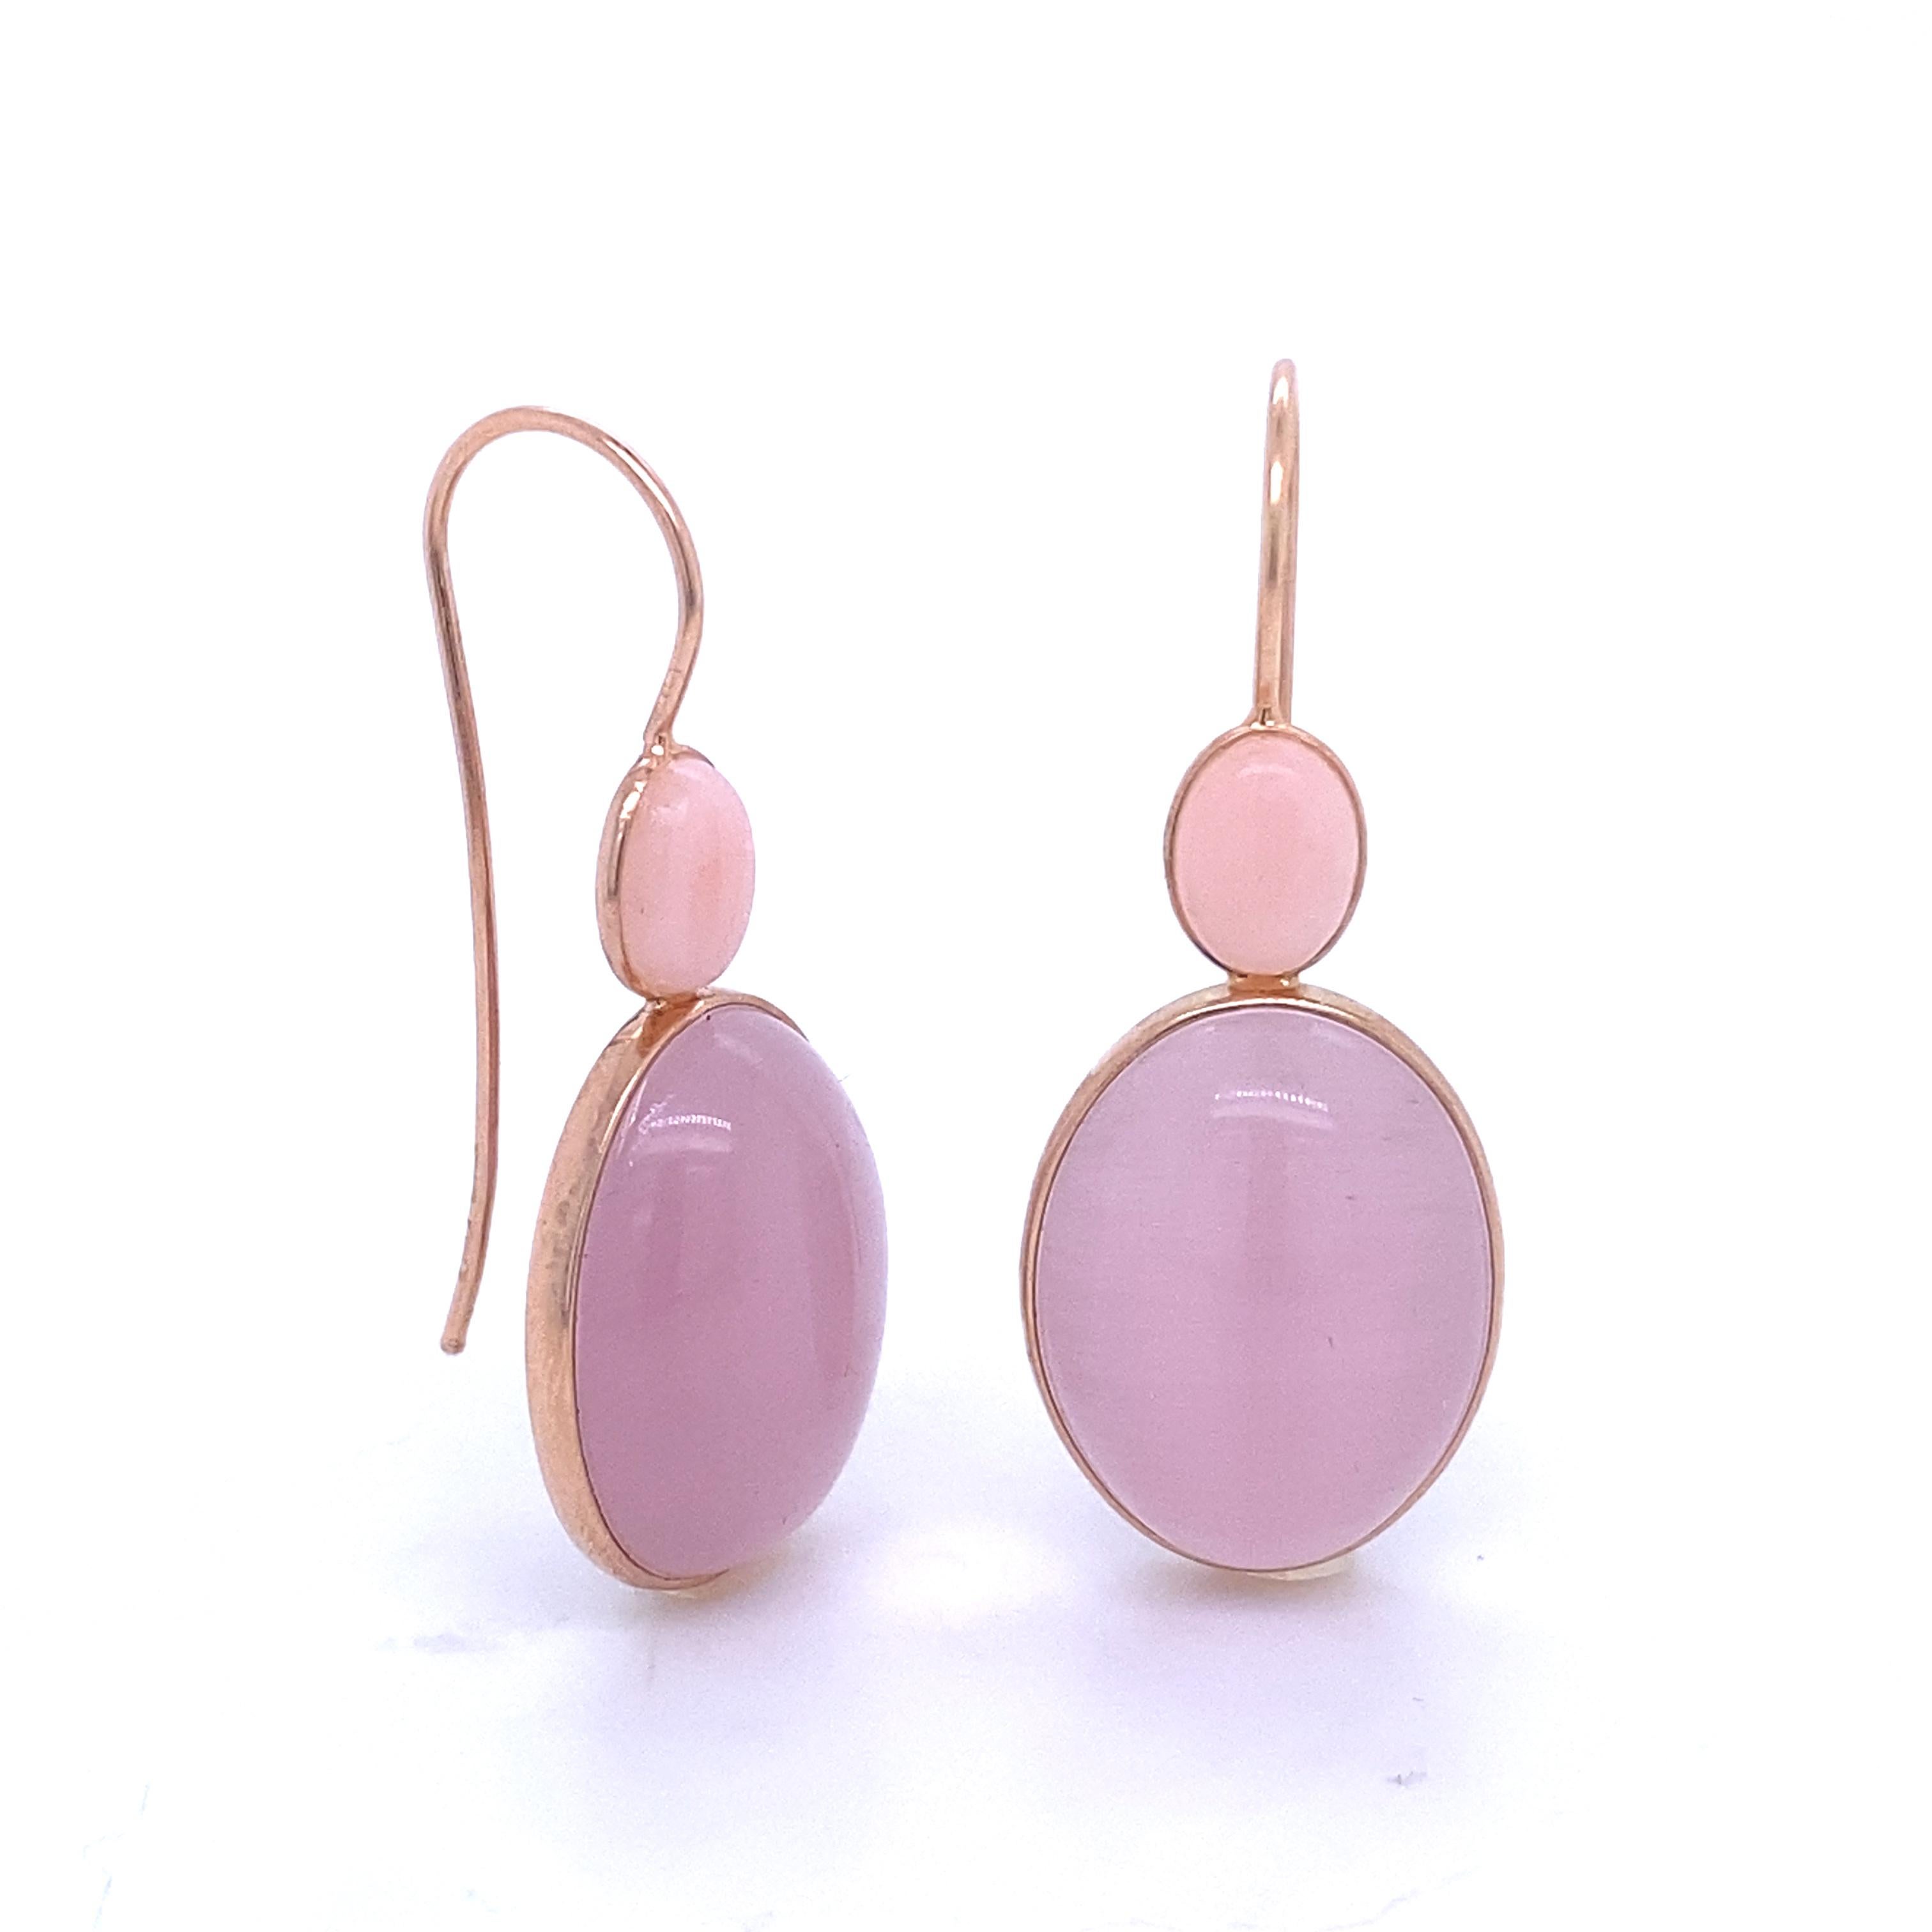 Earrings in Pink Gold Cabochon of Opal and Pink Quartz
French Collection by Mesure et Art du Temps.

18 Carat pink gold earrings accompanied by cabochon of opal and pink quartz. The earring measures 4 cm in width and 1.5 cm in length. The earrings